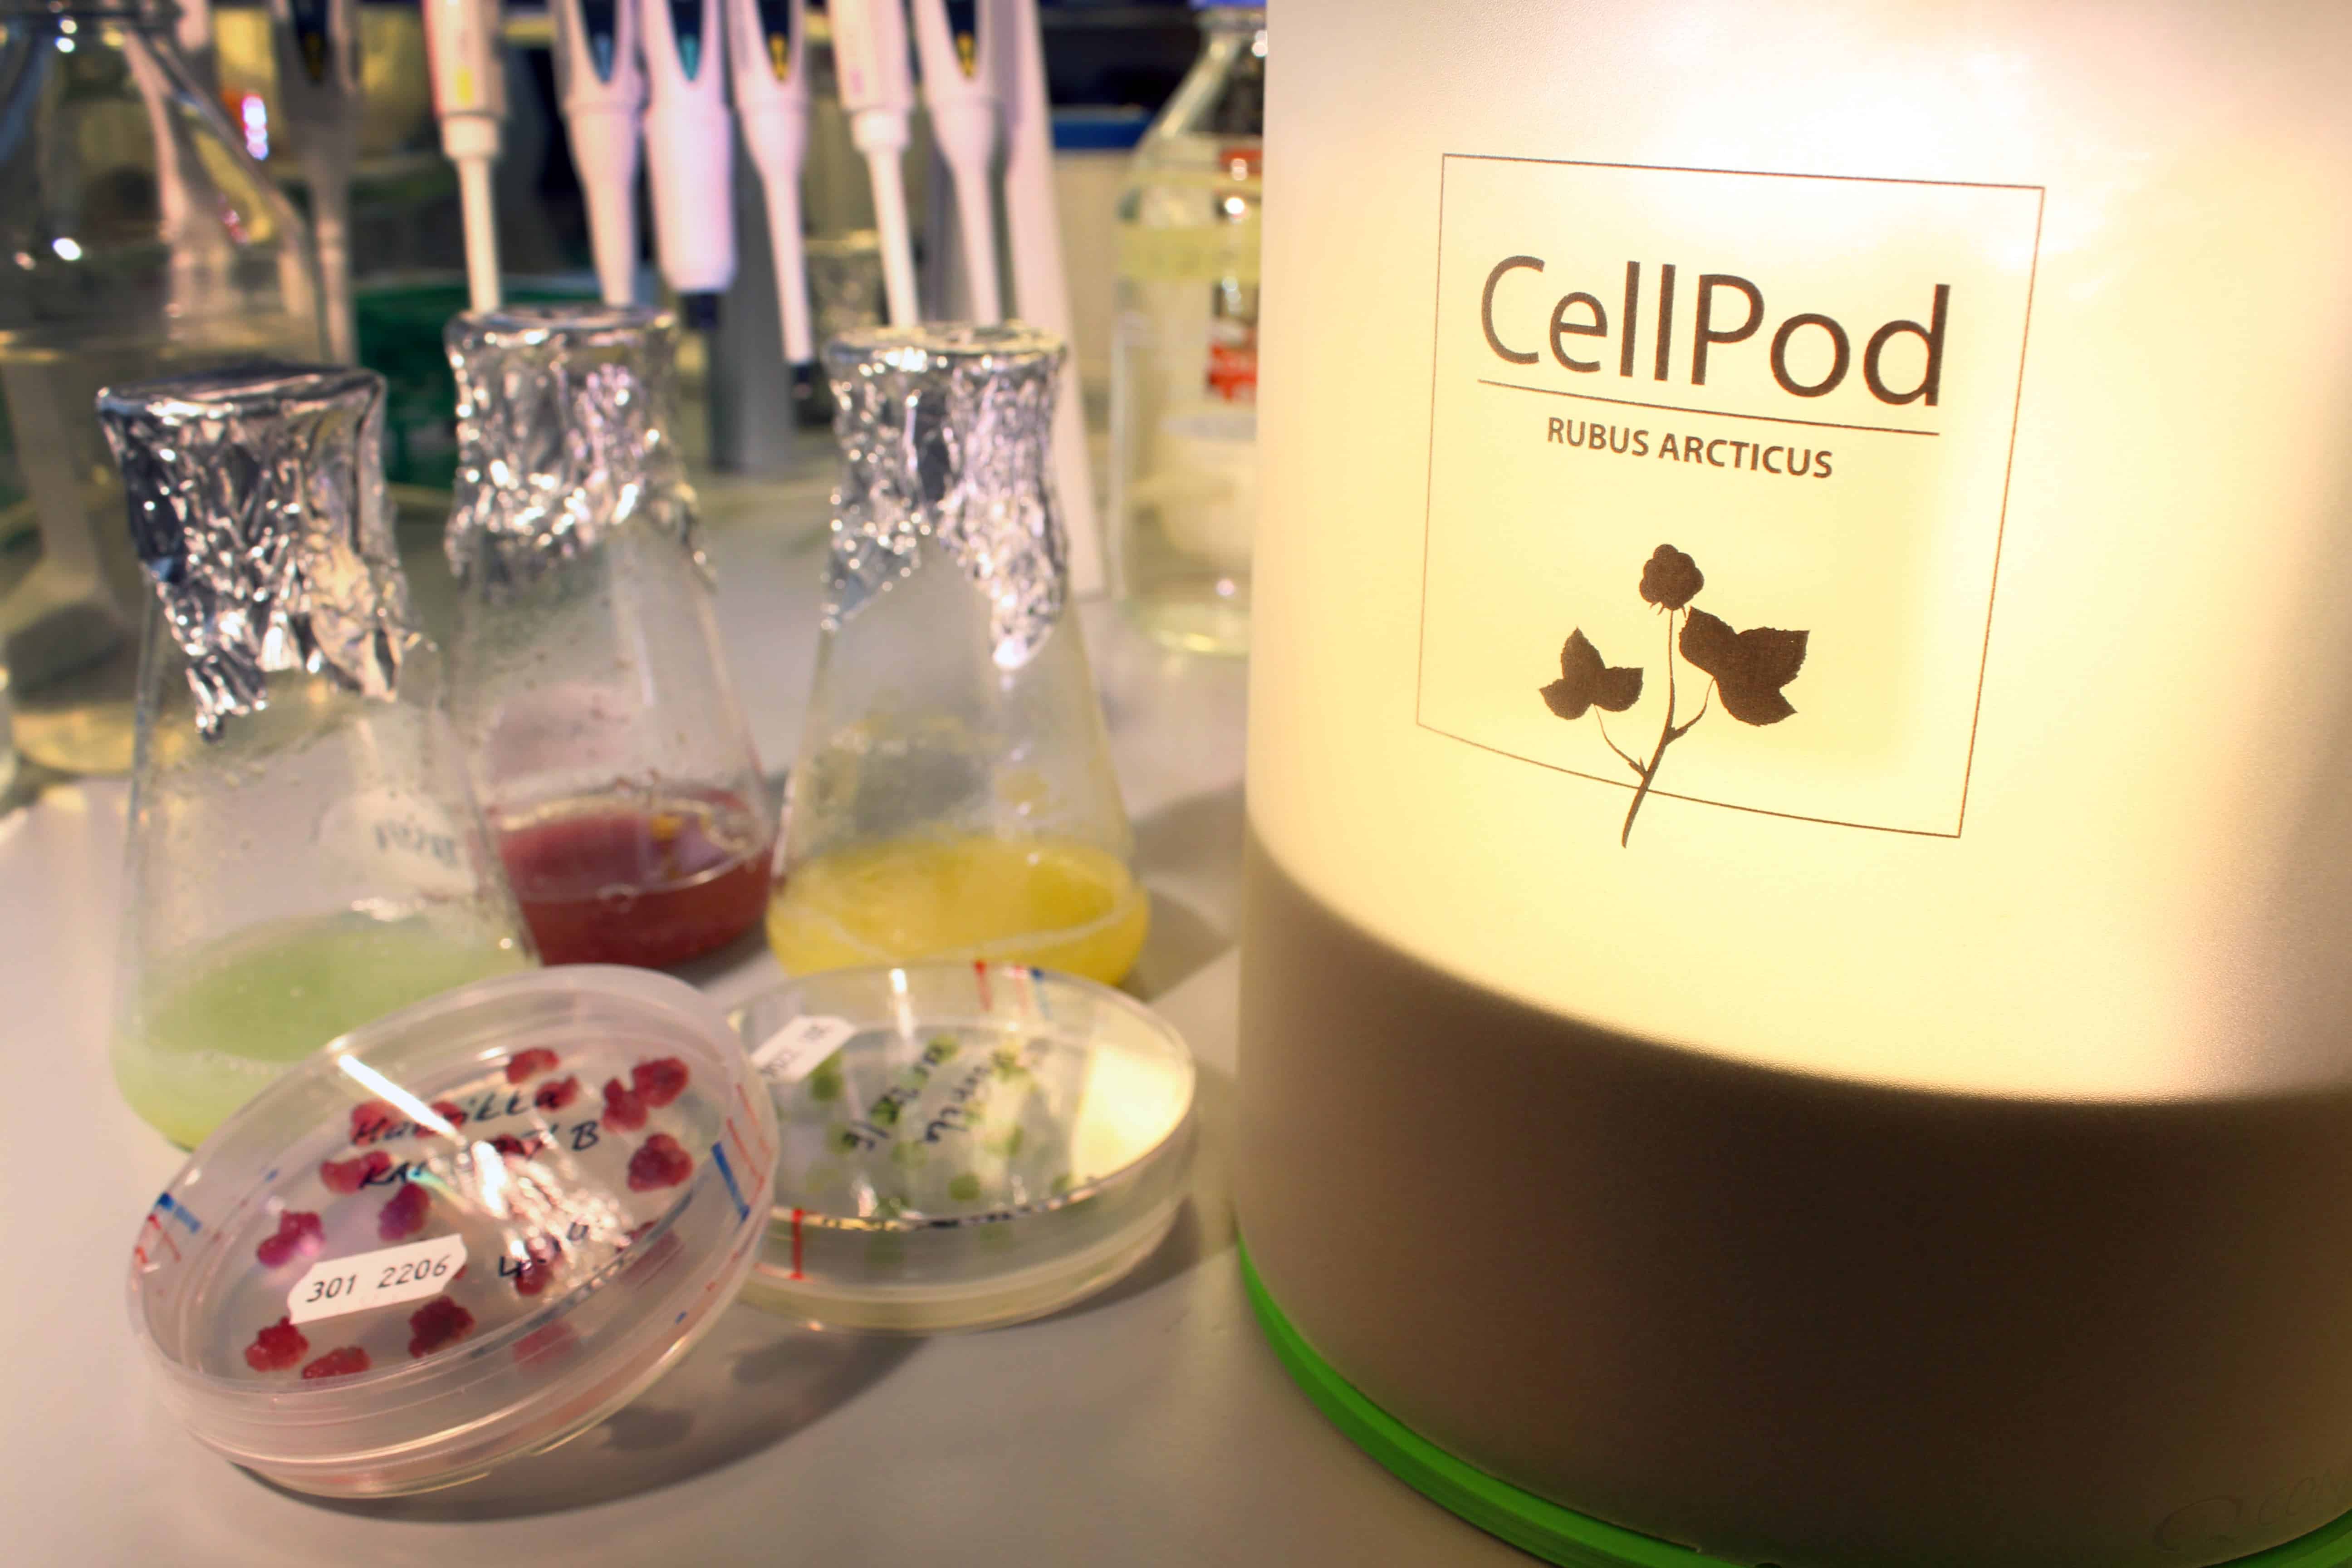 The CellPod and seed cultures.
Image credits VTT.